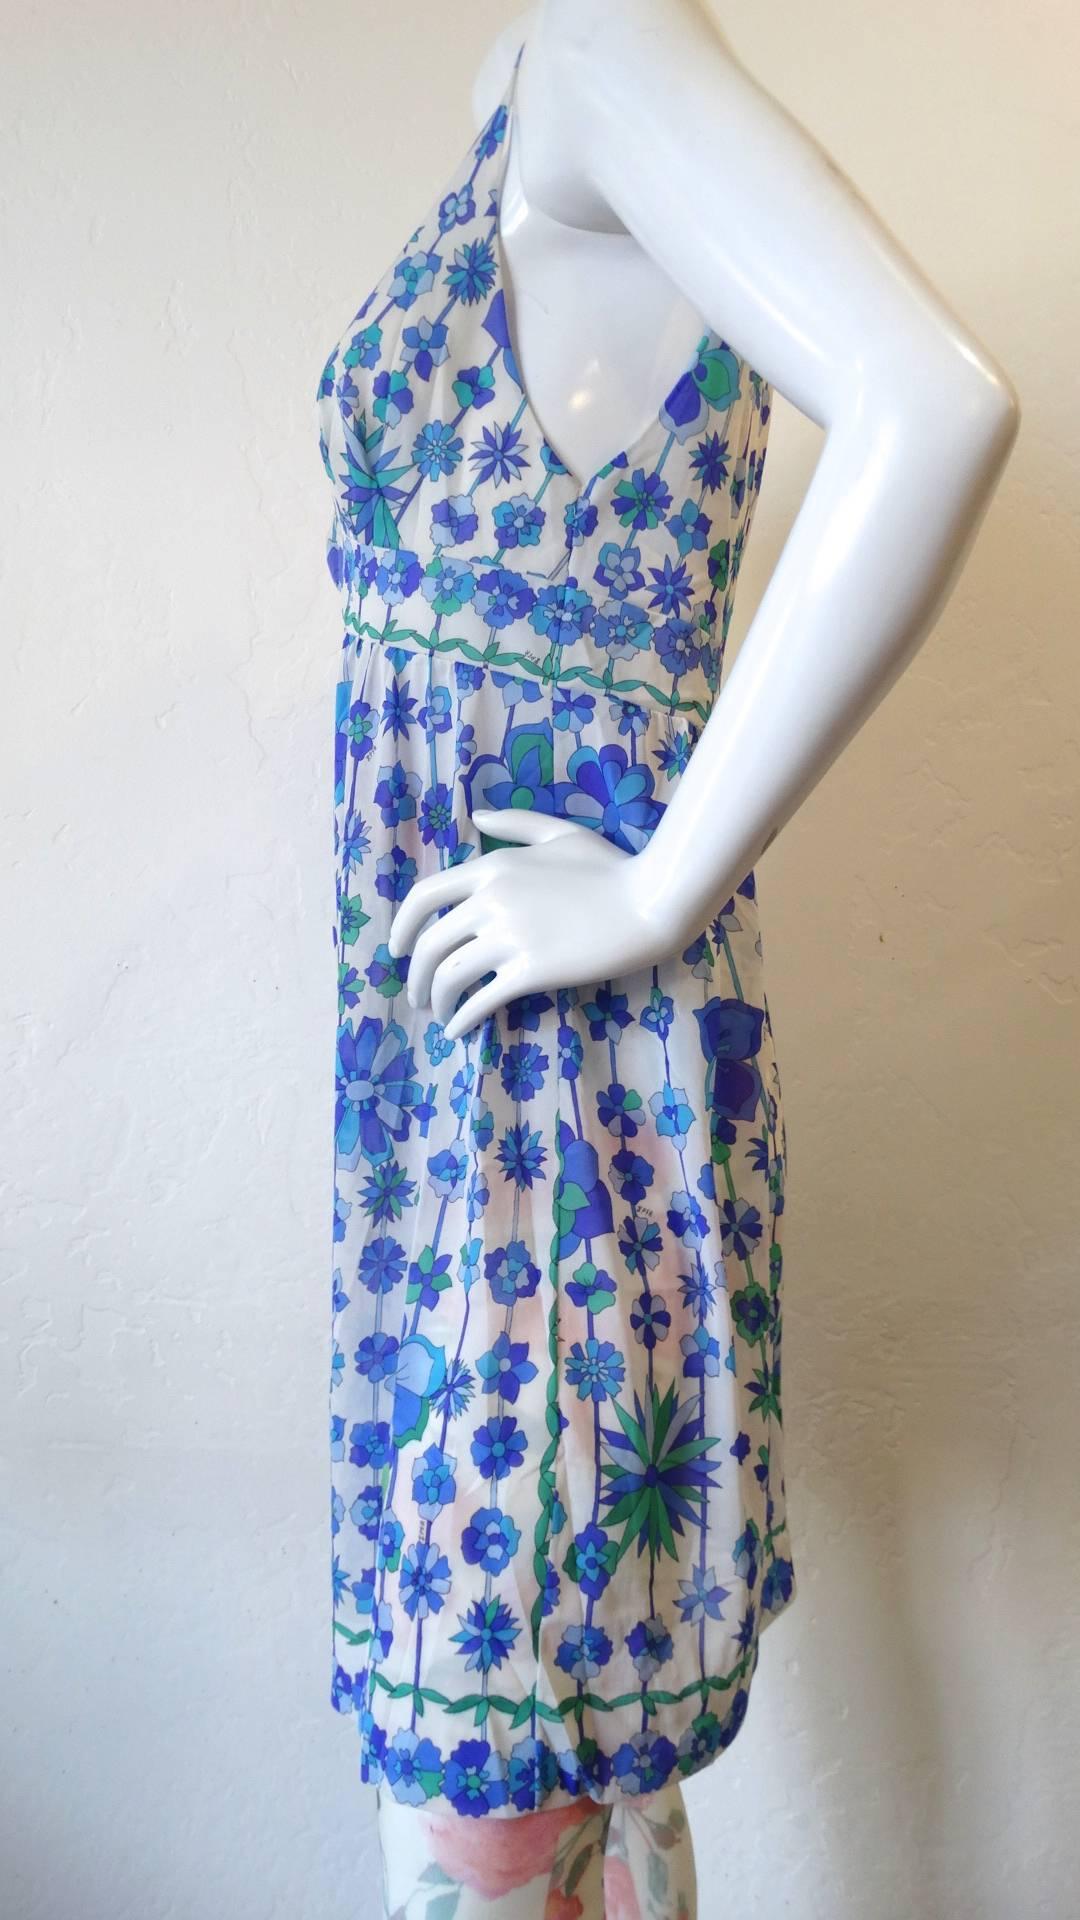 The most adorable little dress from 1960s Emilio Pucci for Formfit Rodgets! Made out of a semi sheer floral fabric in shades of blue, violet and green. Flattering v-neckline and empire waist. The perfect piece to throw over your bathing suits all